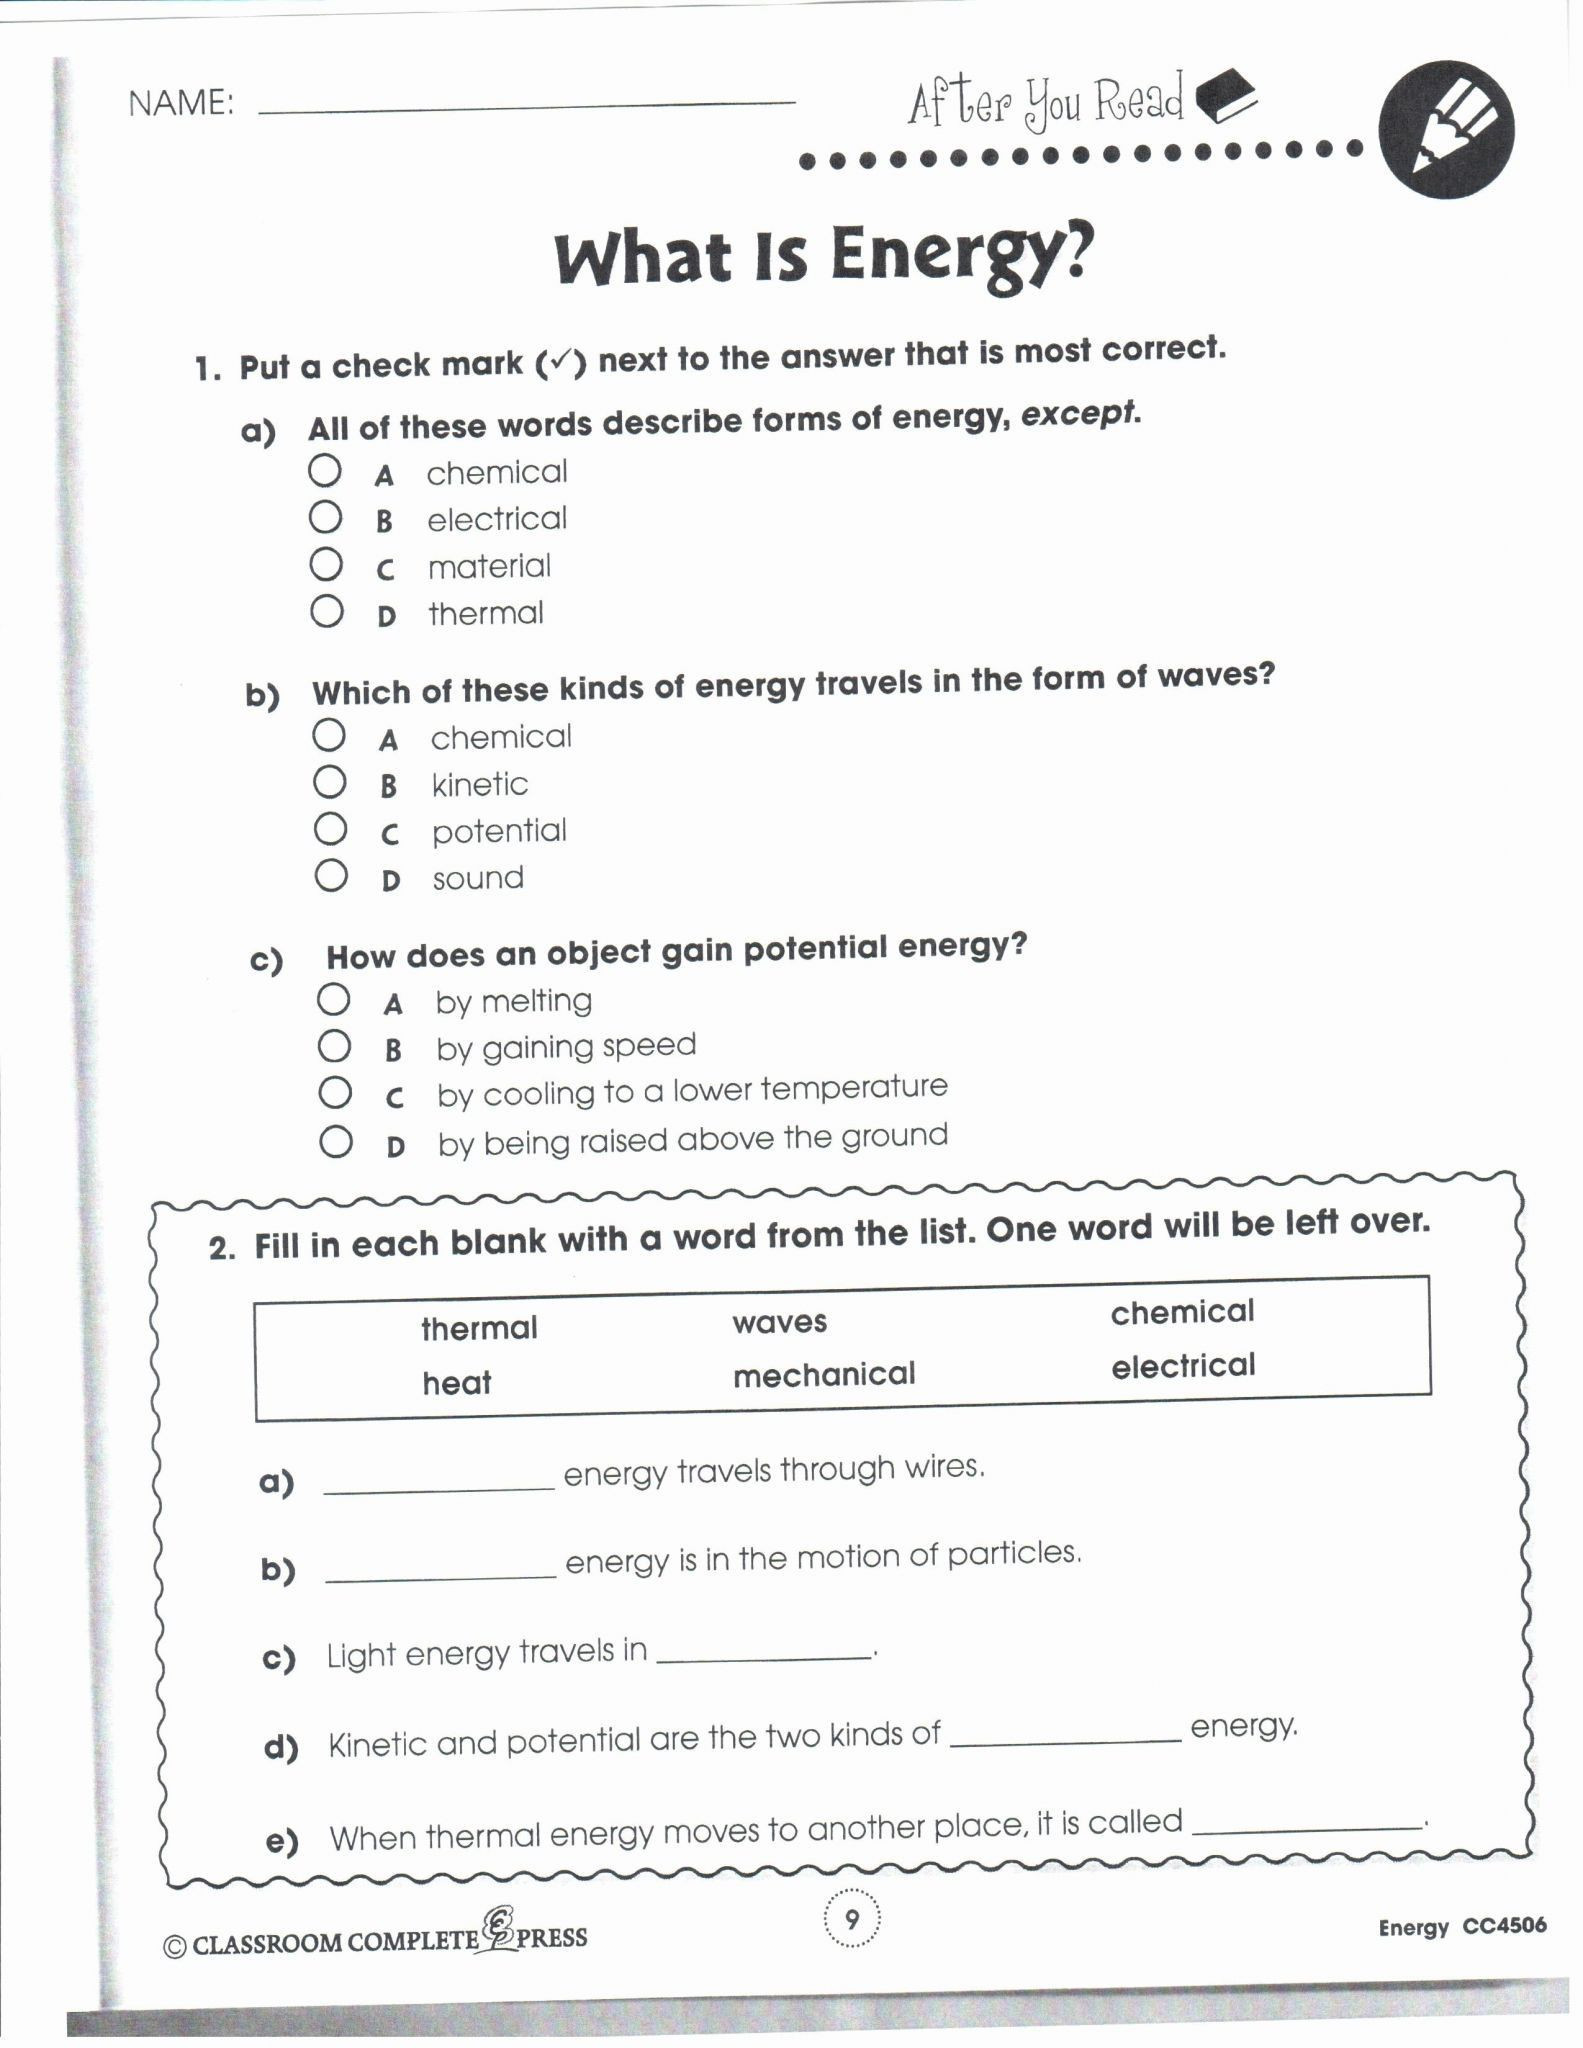 Second Grade History Worksheets 4 Free Easy Math Worksheets for 2nd Grade In 2020